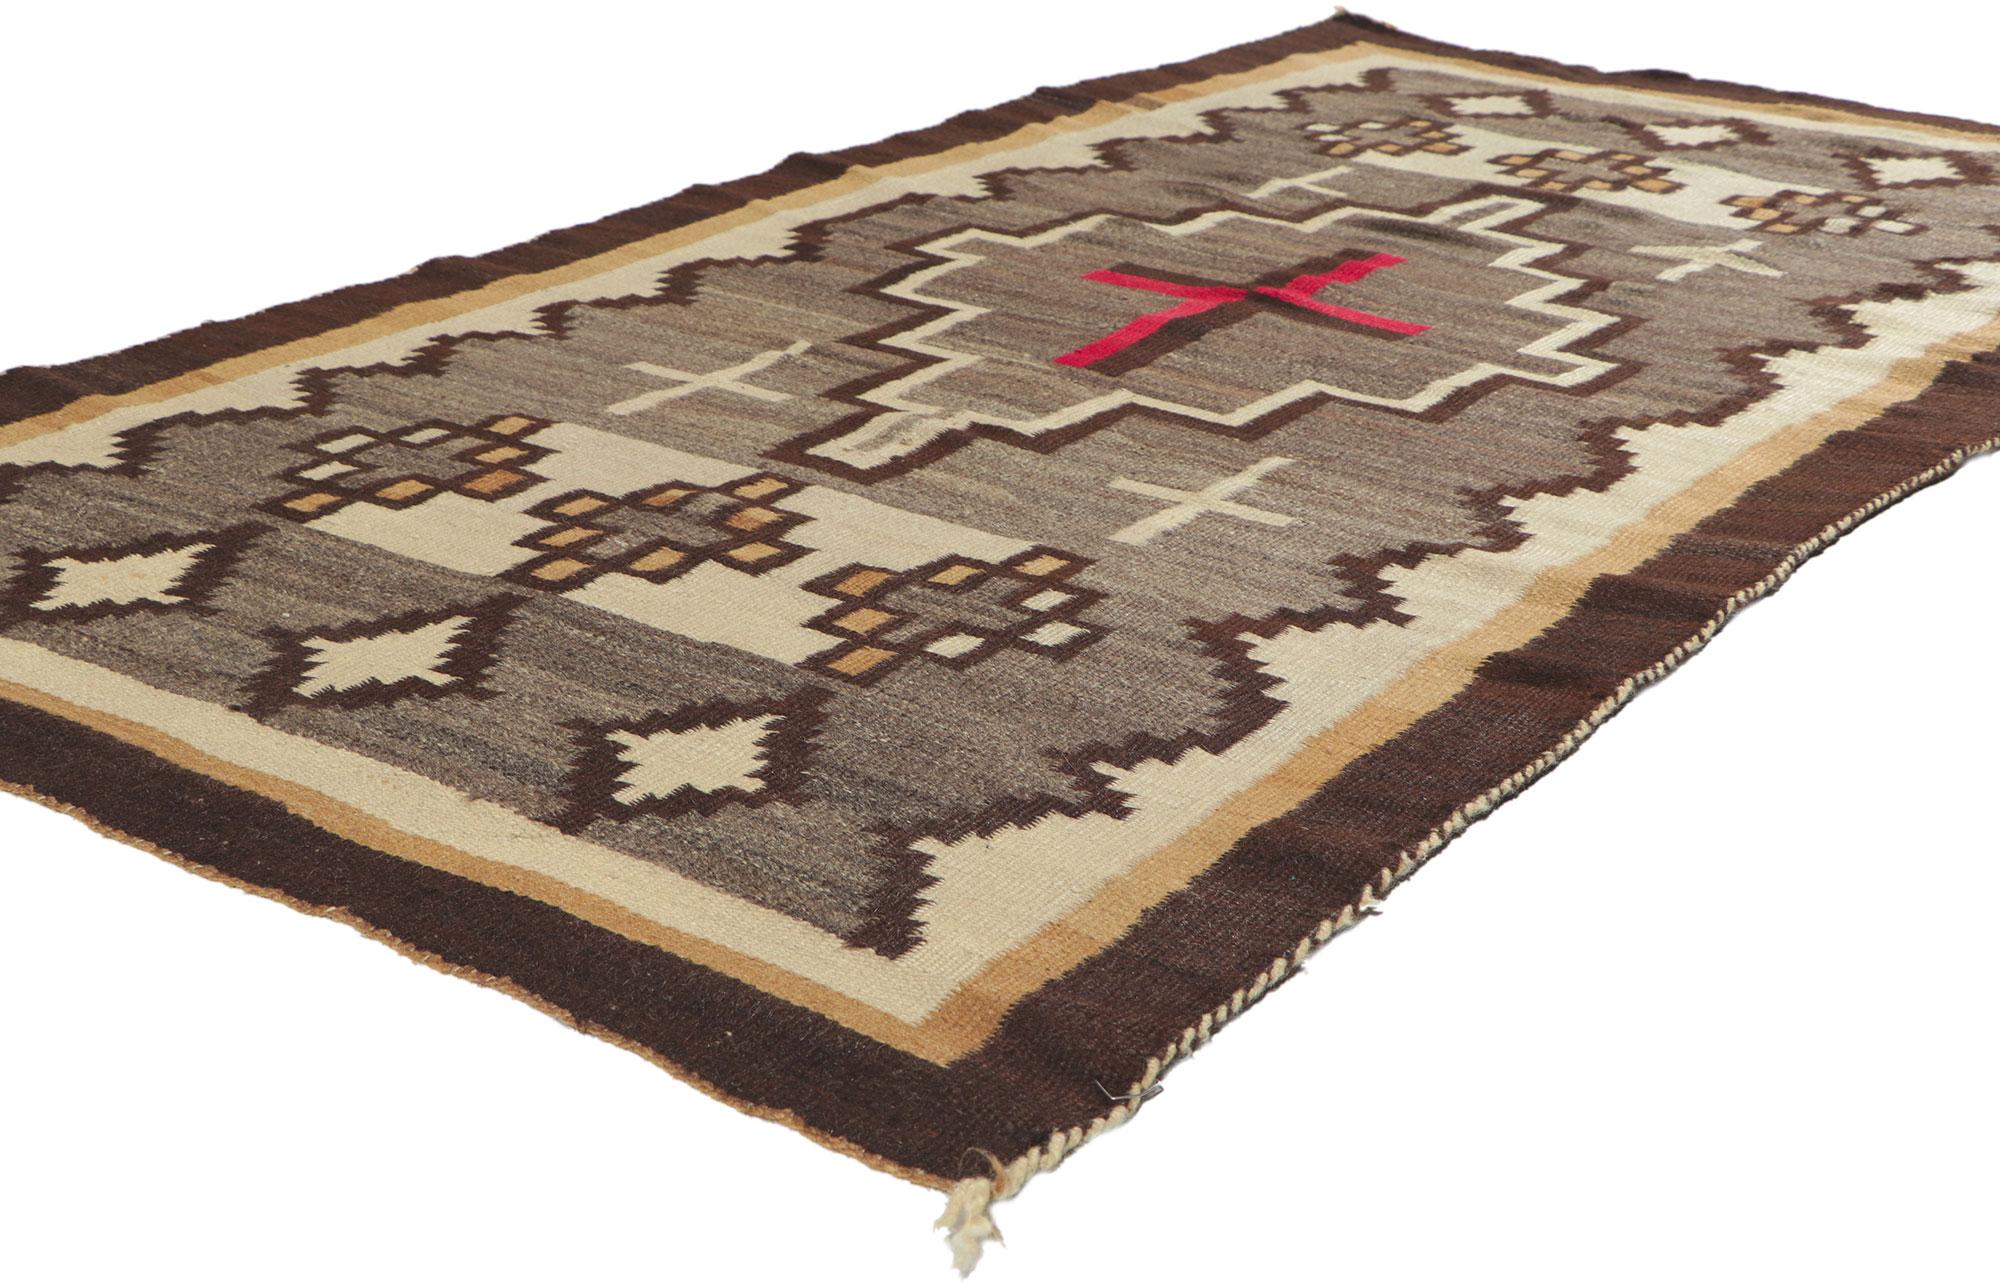 78351 Vintage Navajo Kilim Rug with Native American Style, 03'09 x 07'01. With its bold expressive design, incredible detail and texture, this hand-woven wool vintage Navajo Kilim rug is a captivating vision of woven beauty highlighting Native